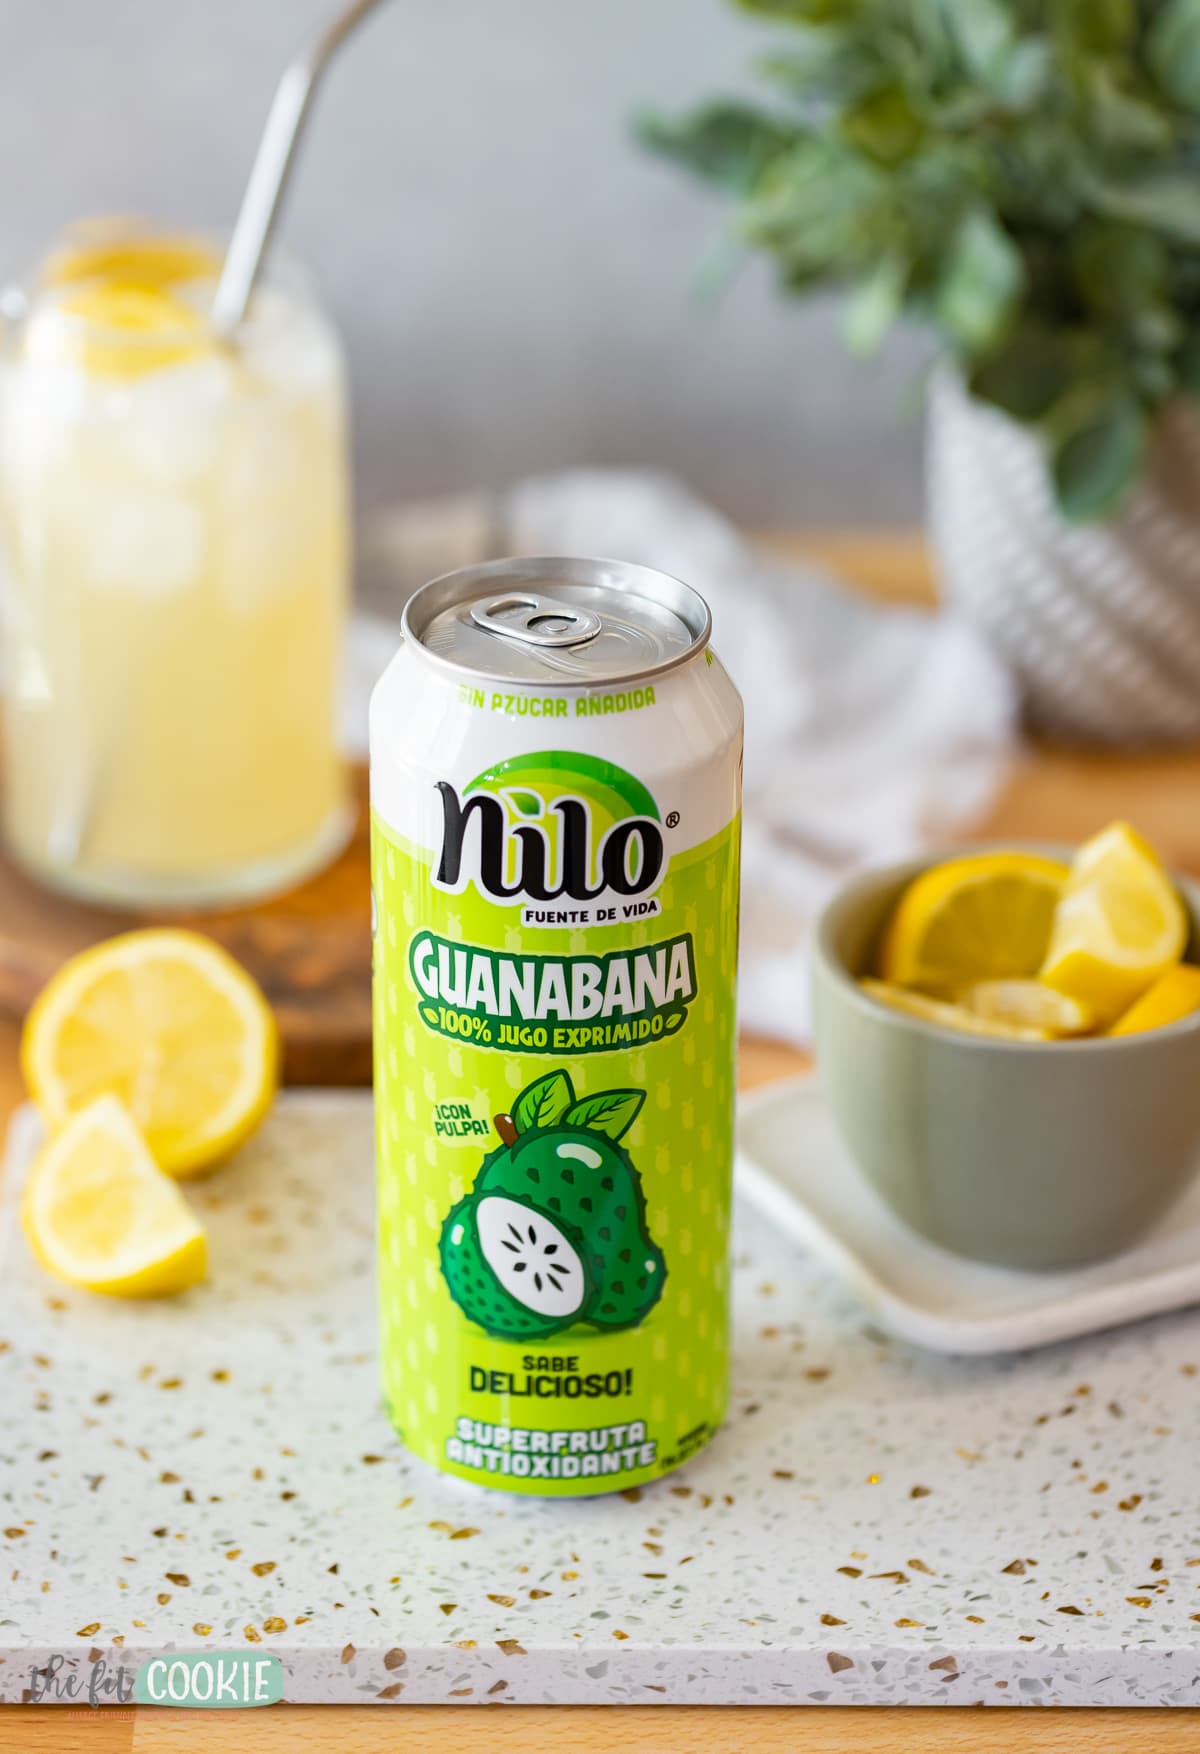 photo of a can of nilo brand guanabana juice with pulp. 